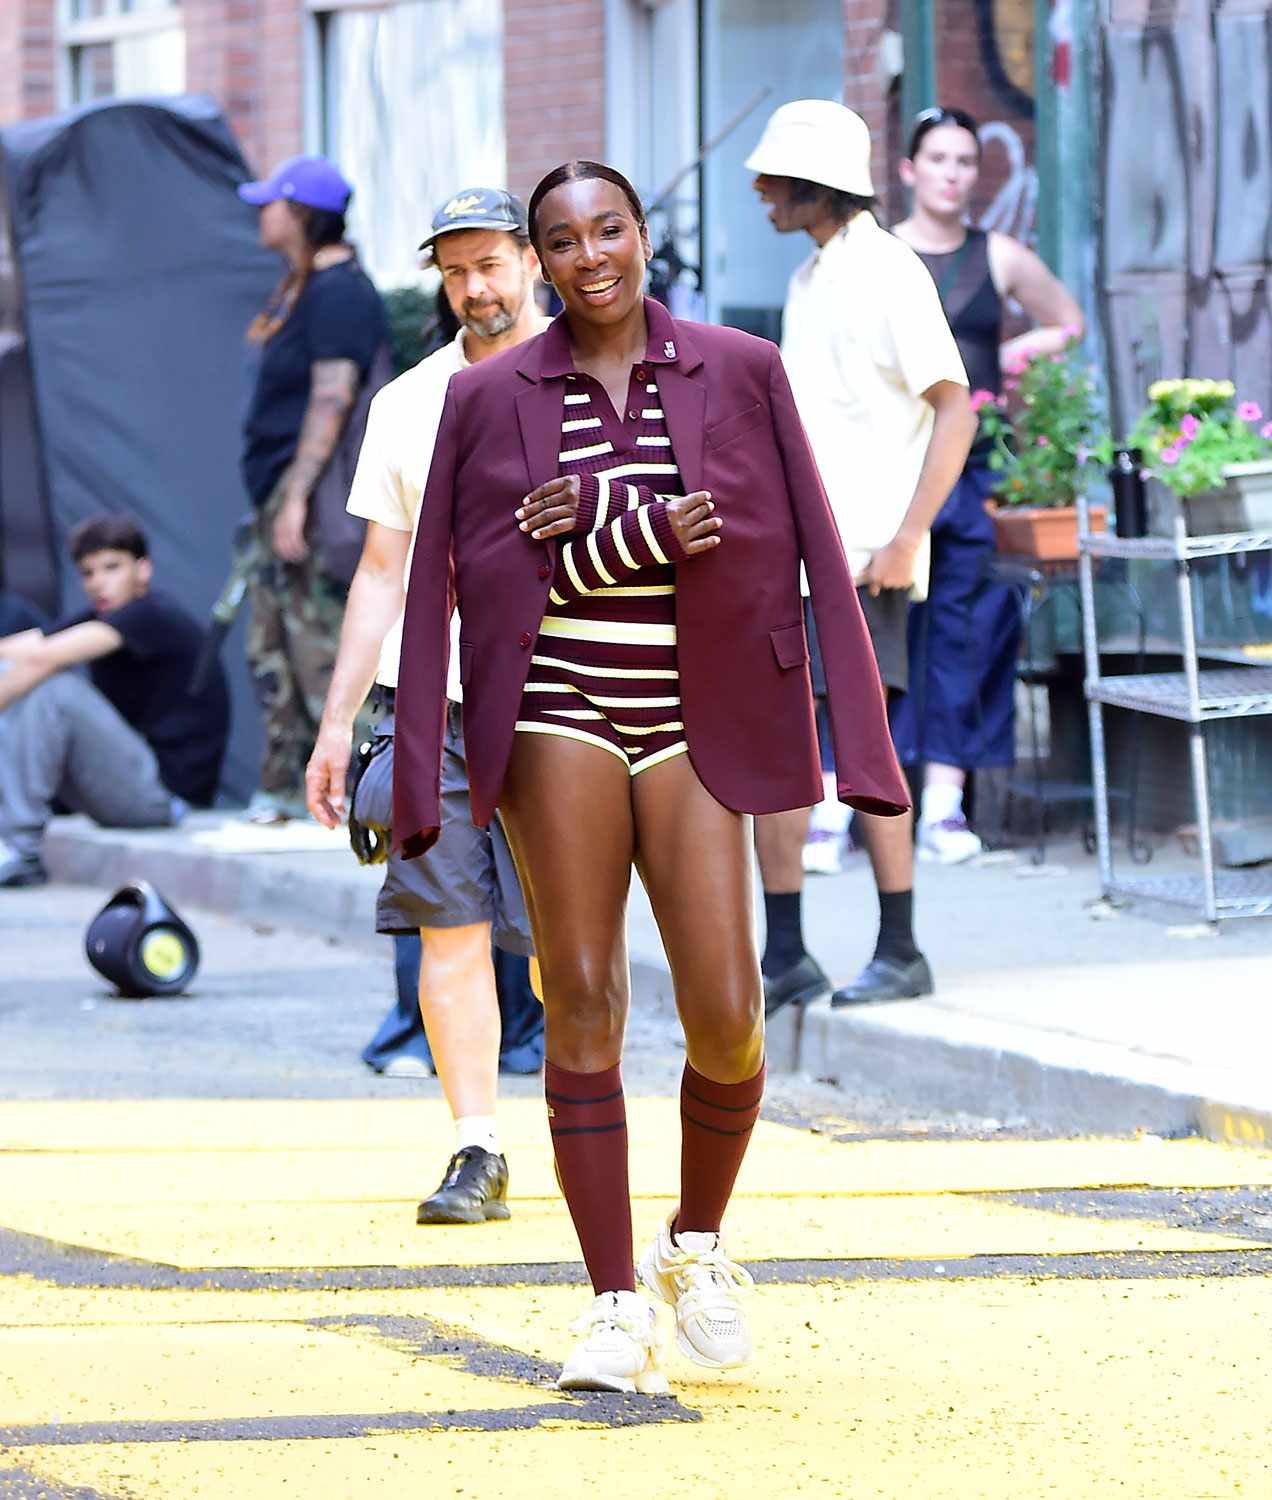 enus Williams is spotted during a photoshoot for Lacoste in New York City. The American professional tennis player modeled several different outfits on the tennis courts before taking the shoot to the streets. 